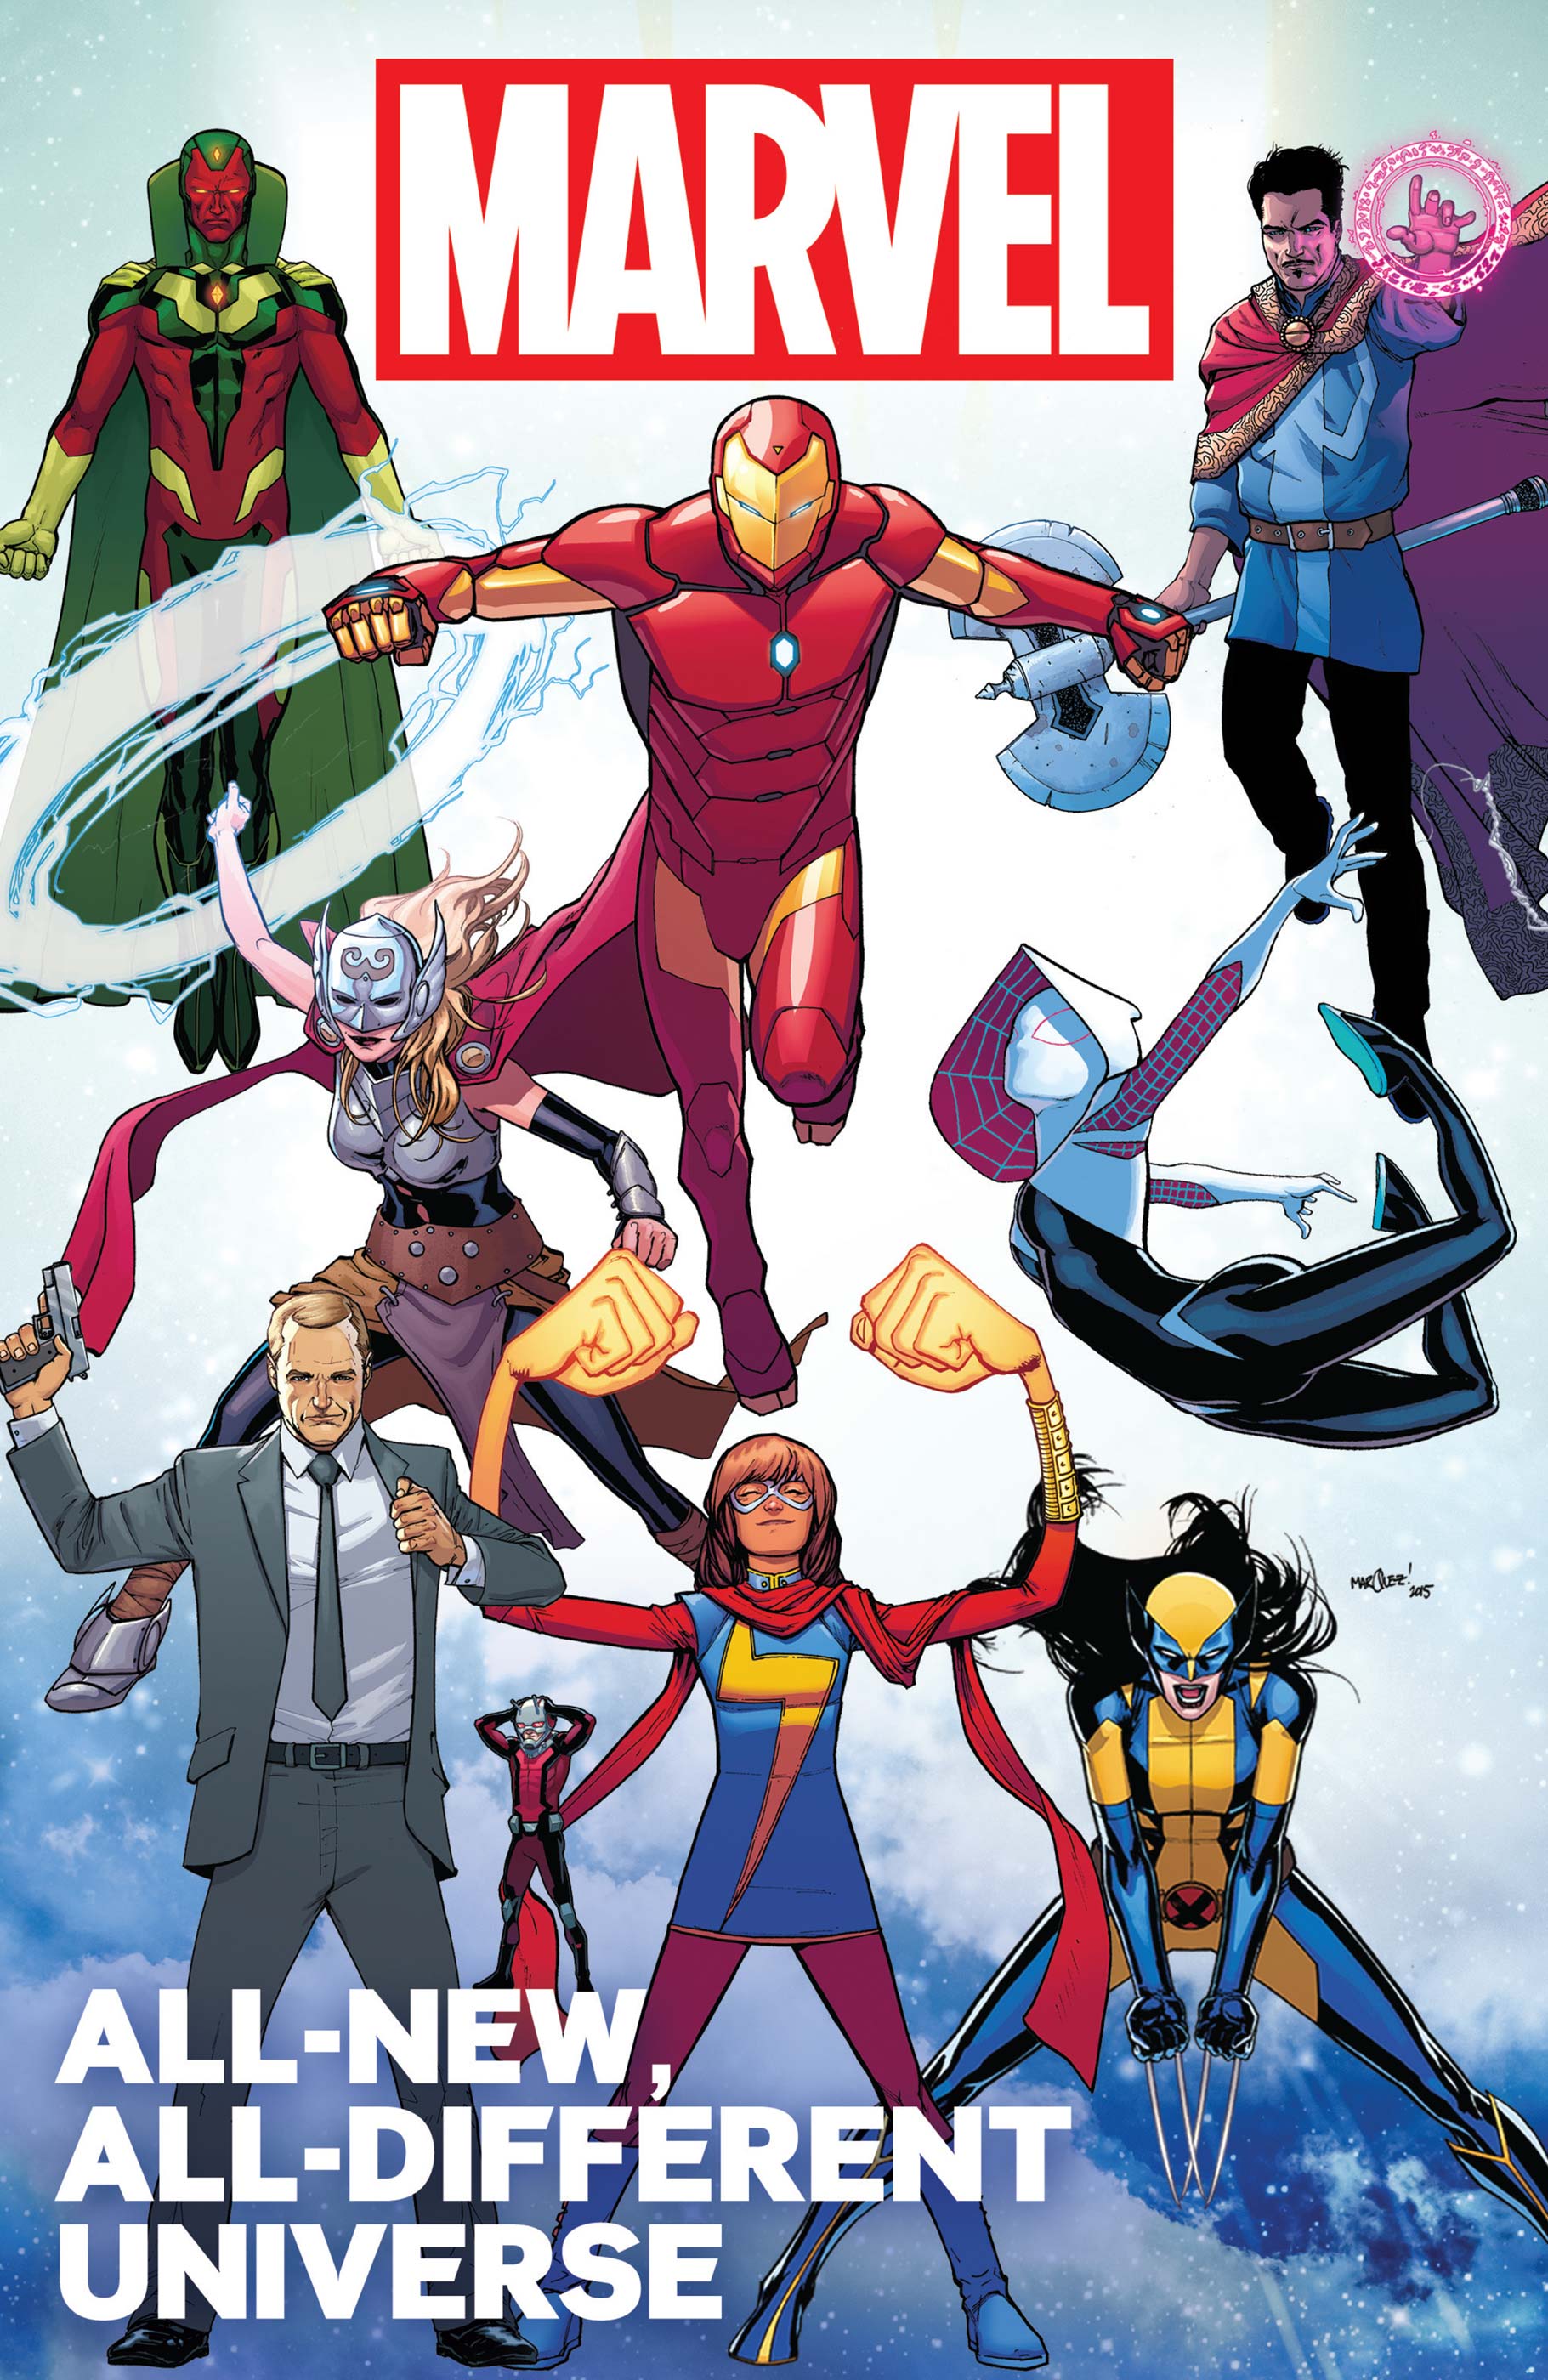 All-New, All-Different Marvel Universe (2015) #1 | Comic Issues | Marvel